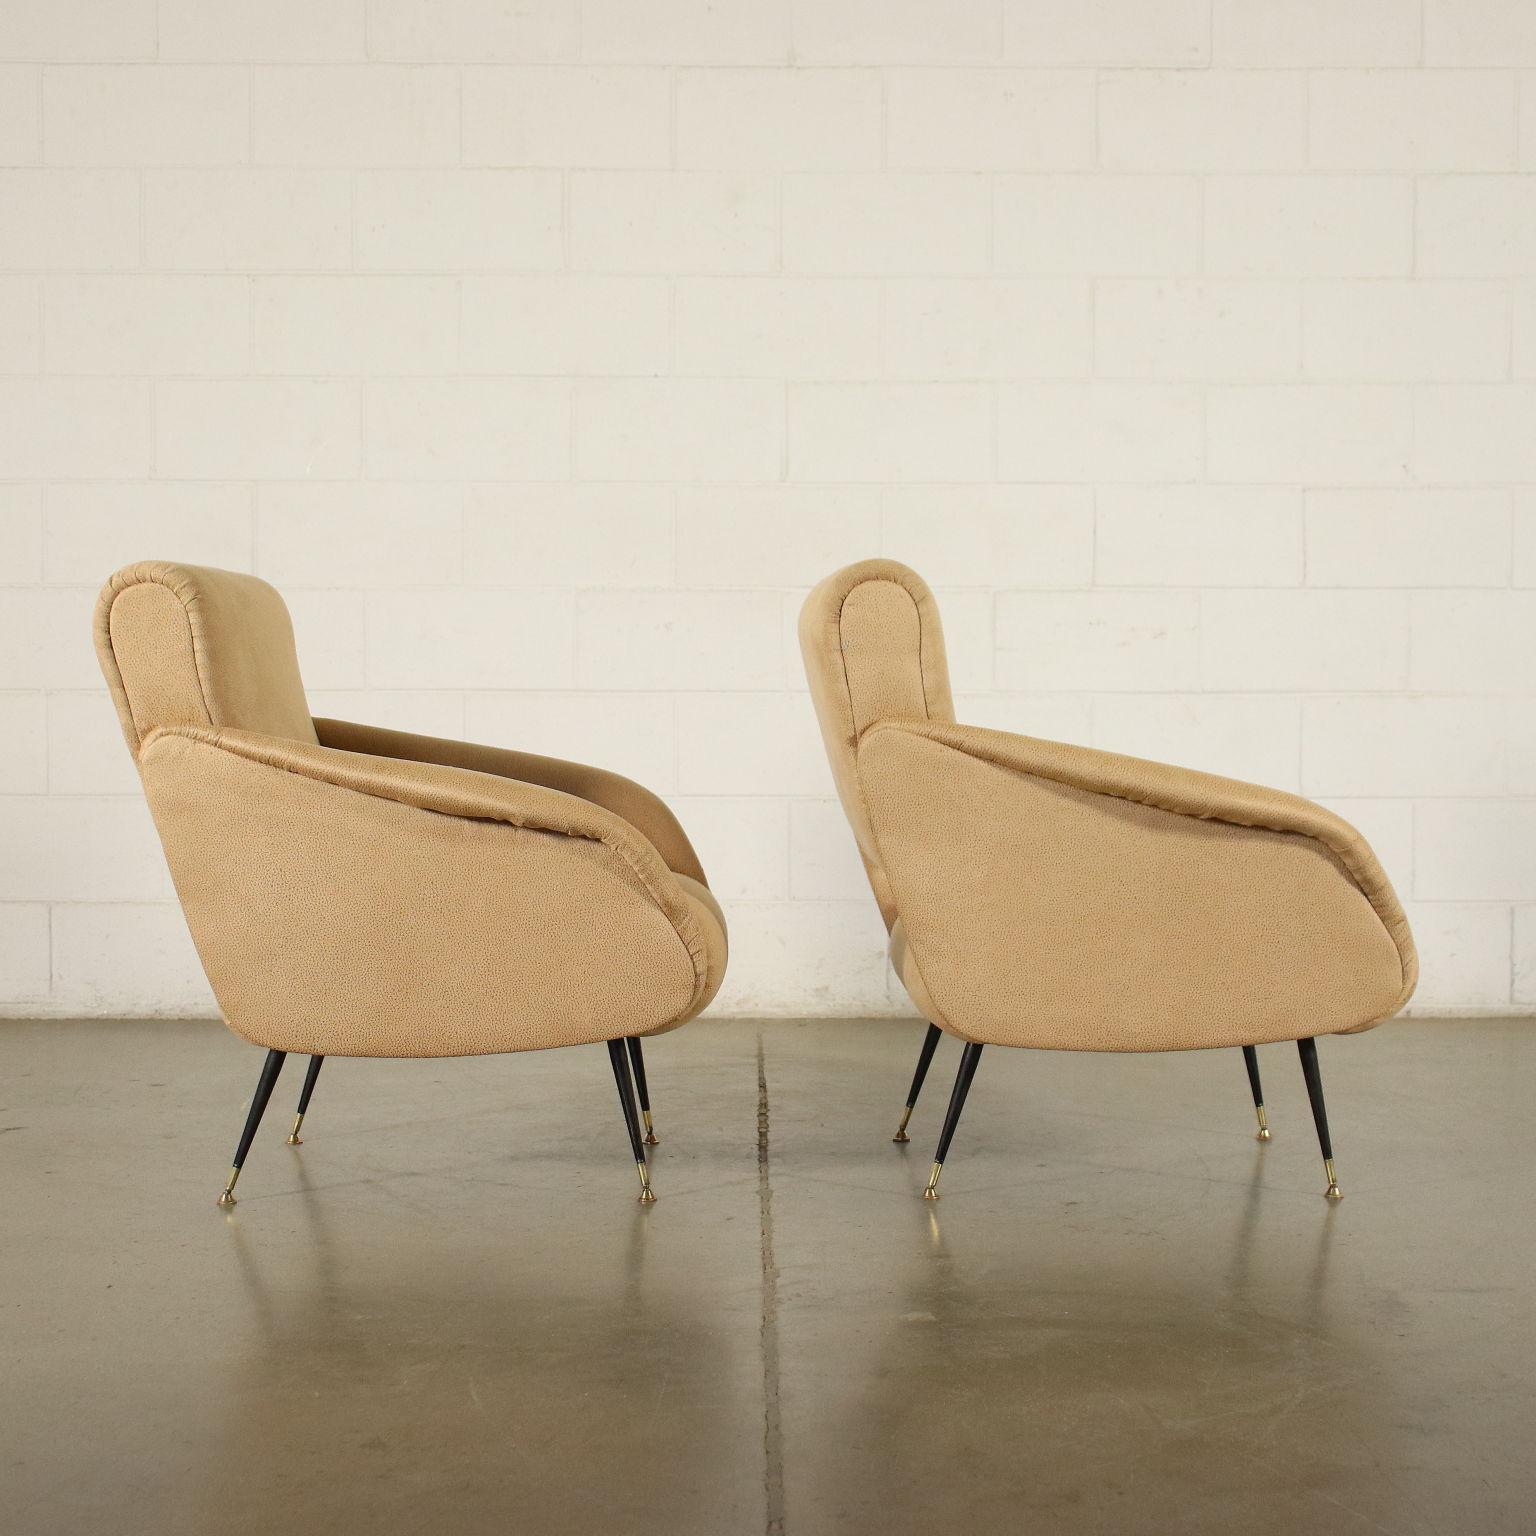 Mid-Century Modern Pair of Armchairs Foam Leatherette, Italy, 1950s 1960s For Sale